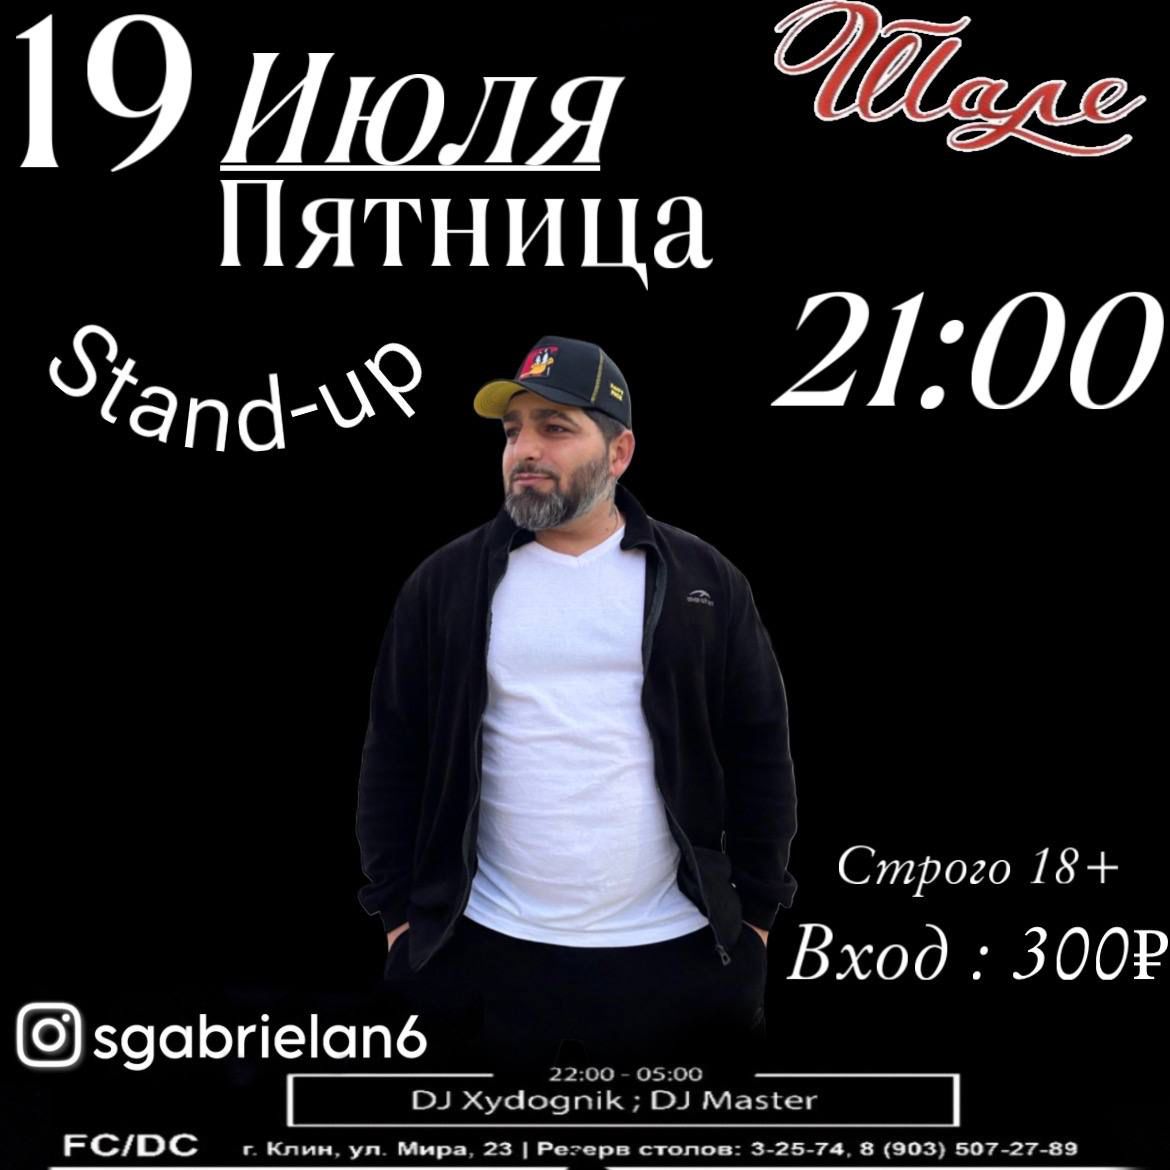 Stand-up Афиша